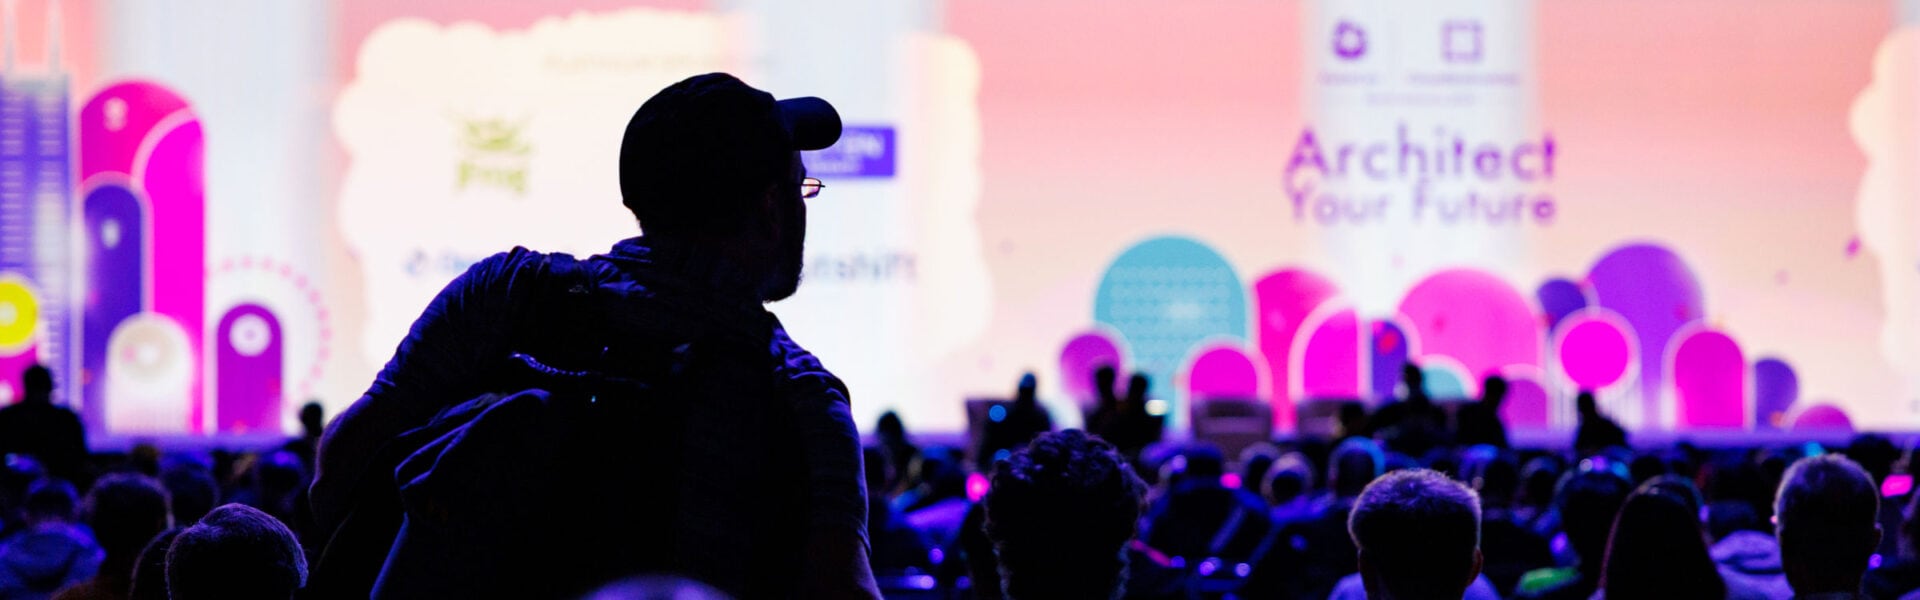 Silhouettes of the back of a seated crowd of attendees, with a man finding a seat for keynotes.